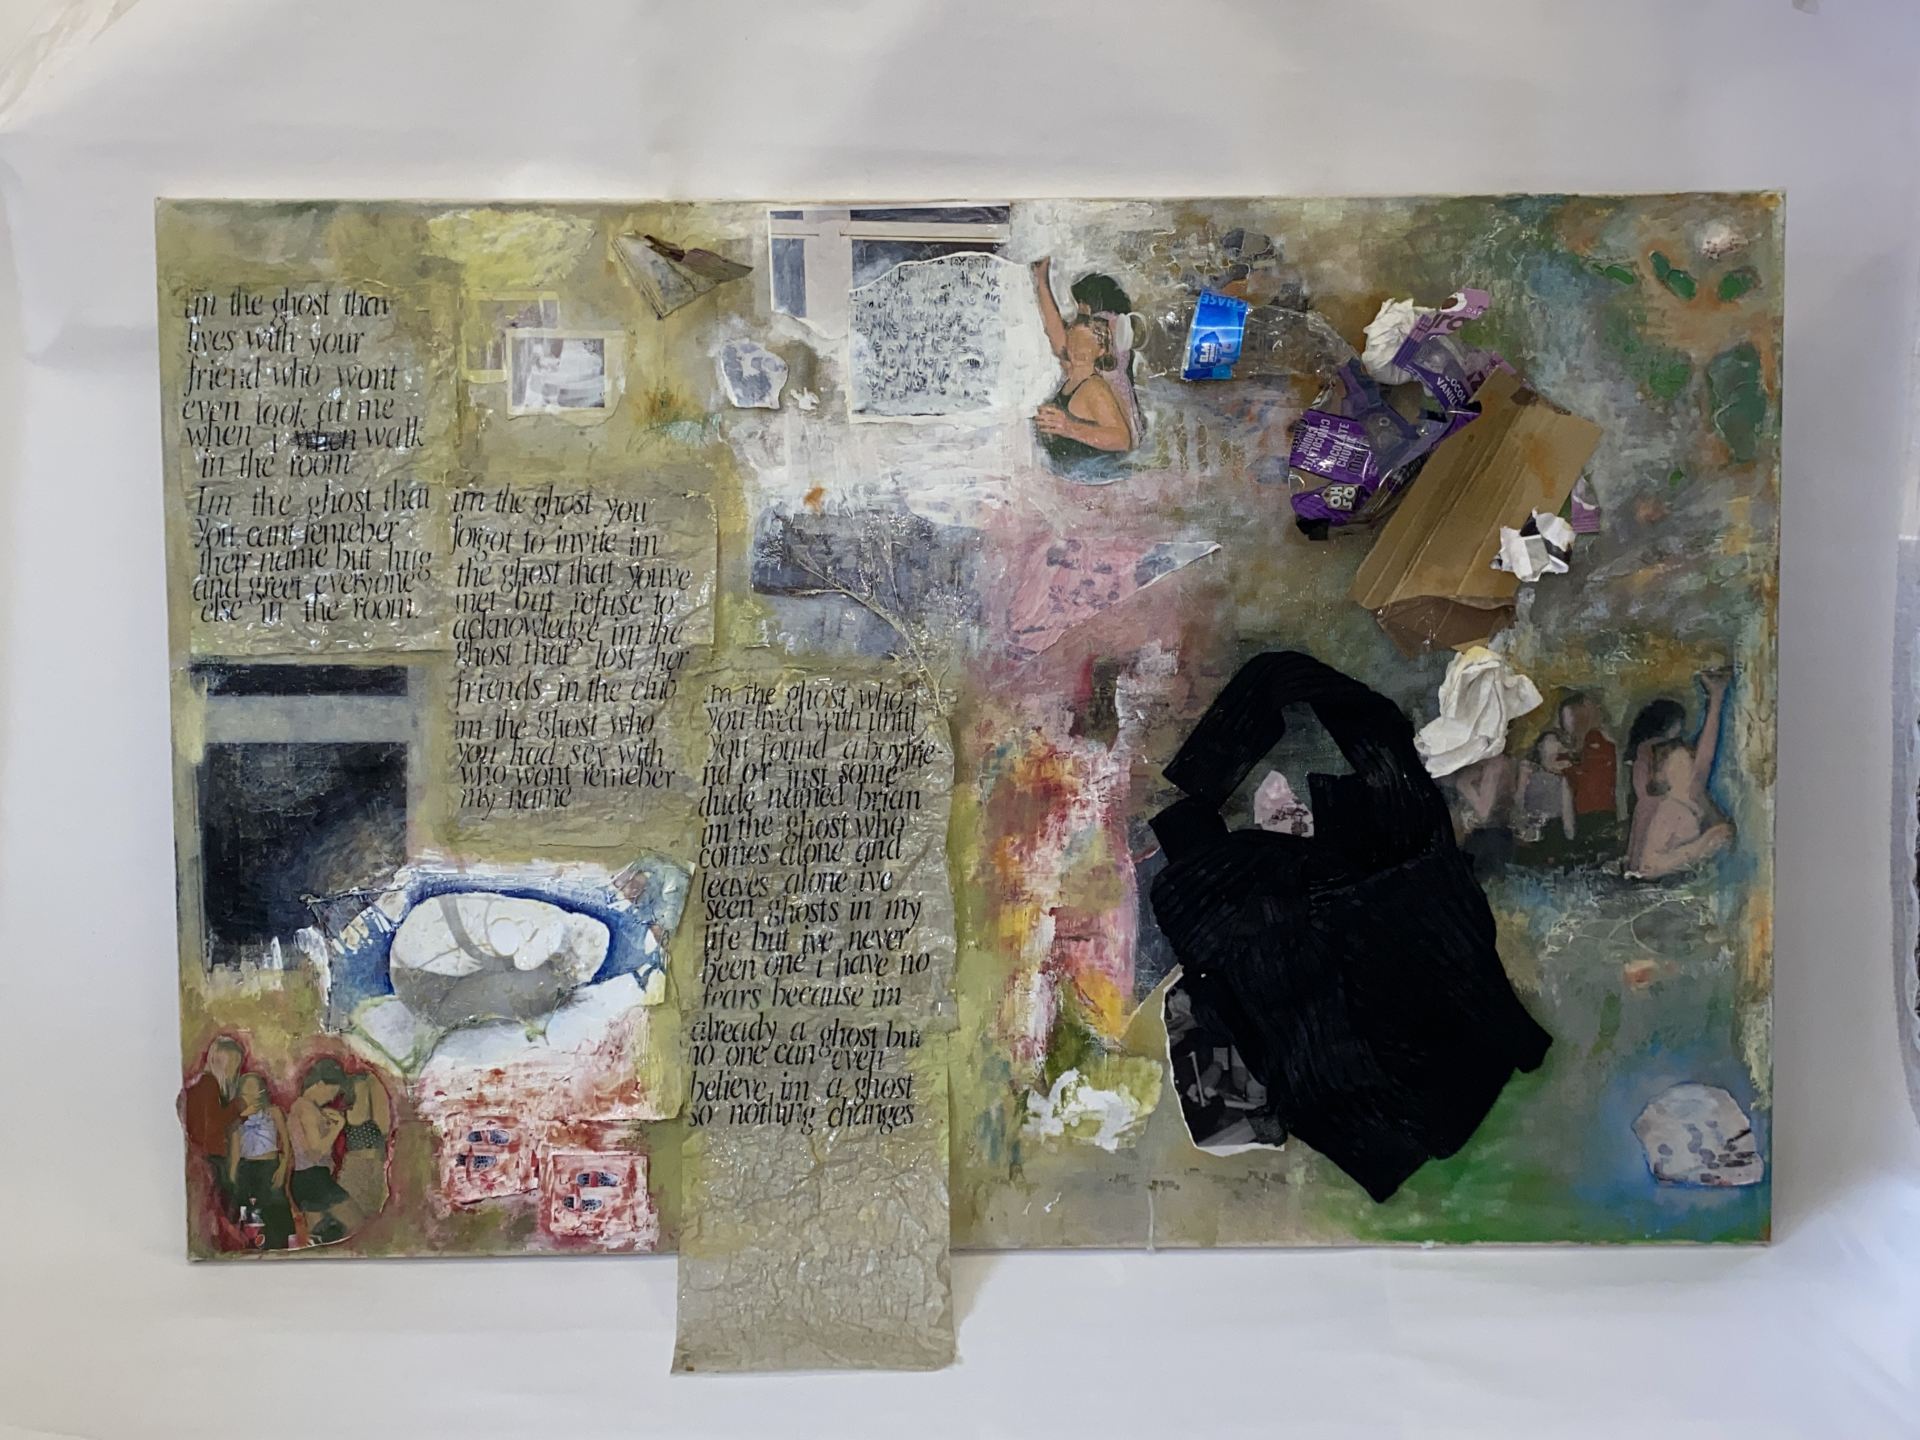 An image of an abstract, collaged painting with written notes.